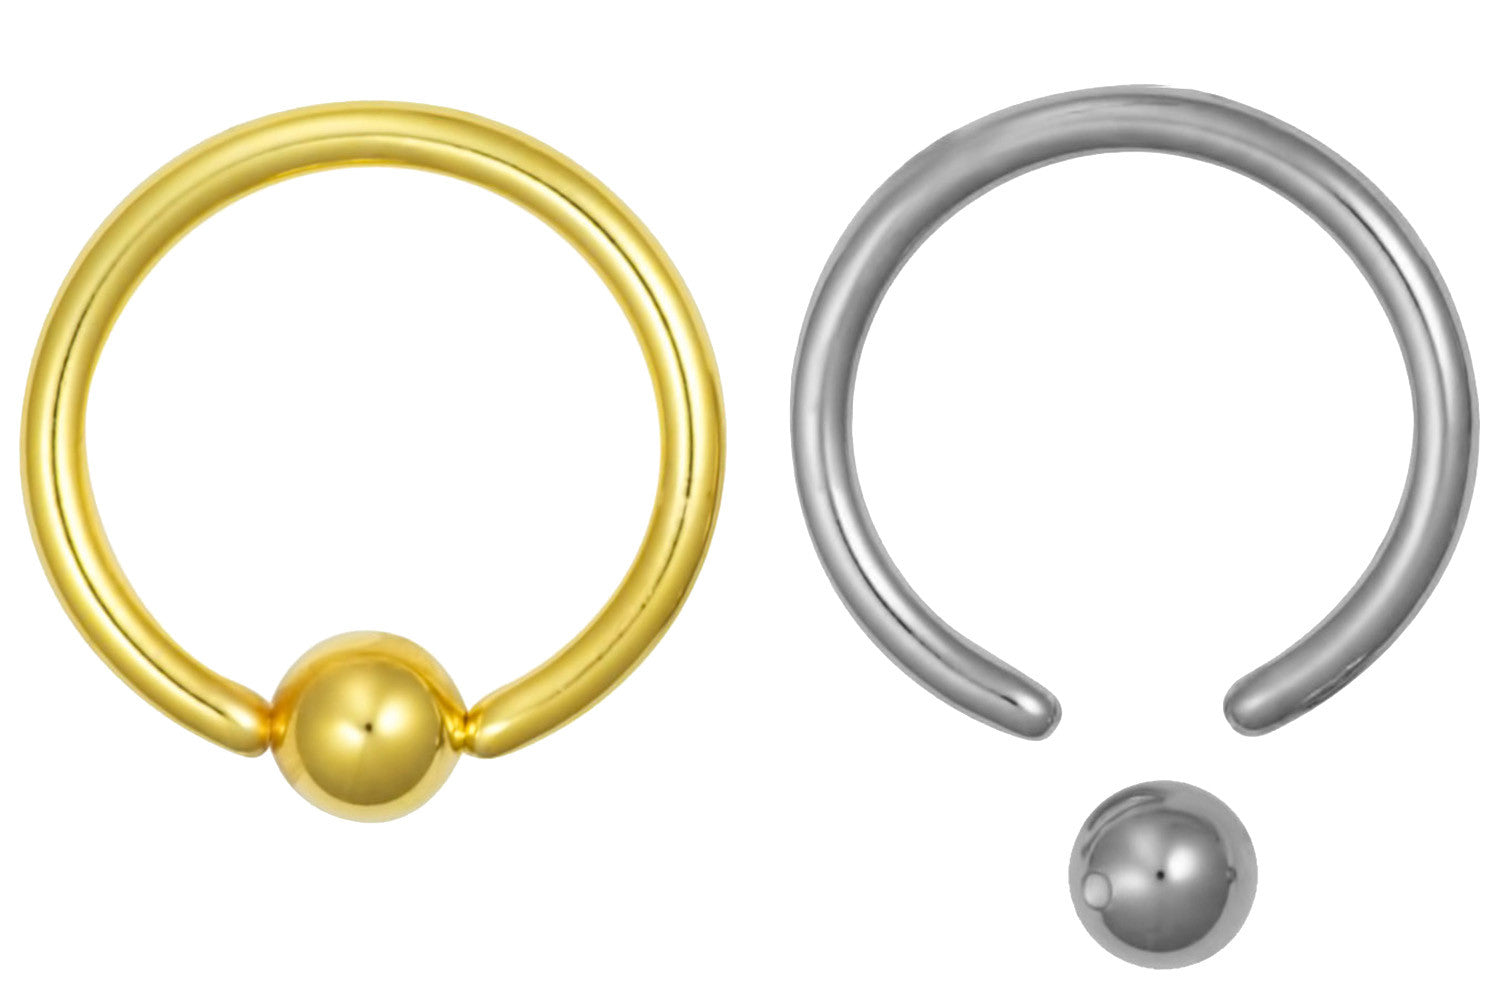 Pair of 14k Gold Plated Captive Bead Rings